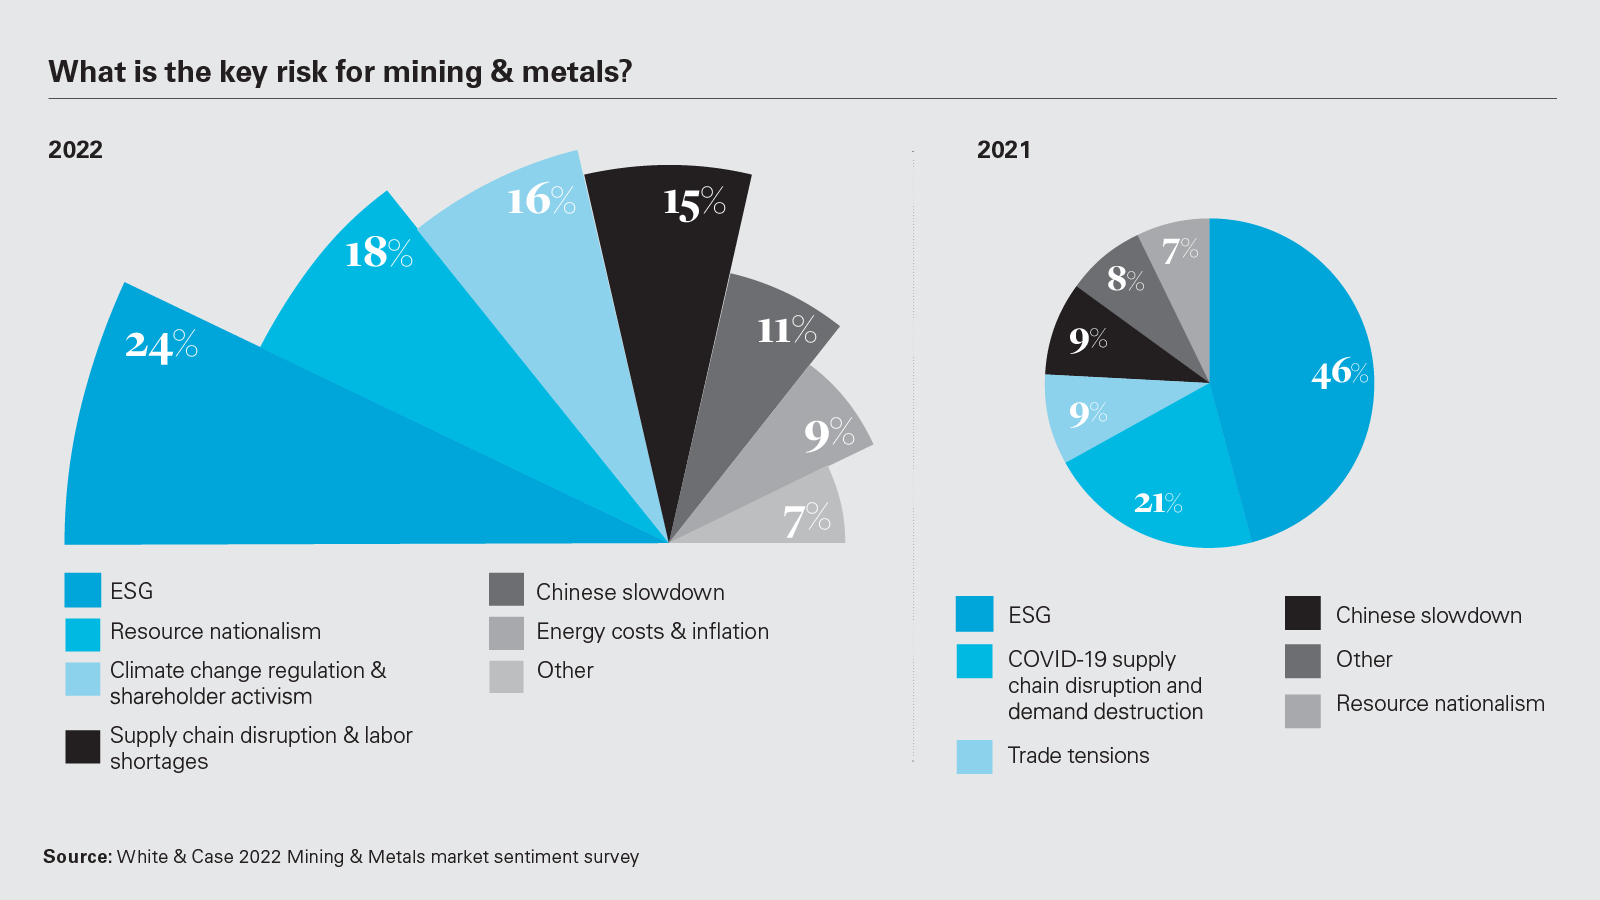 Mining & metals 2022: ESG and energy transition - the sector's biggest opportunity